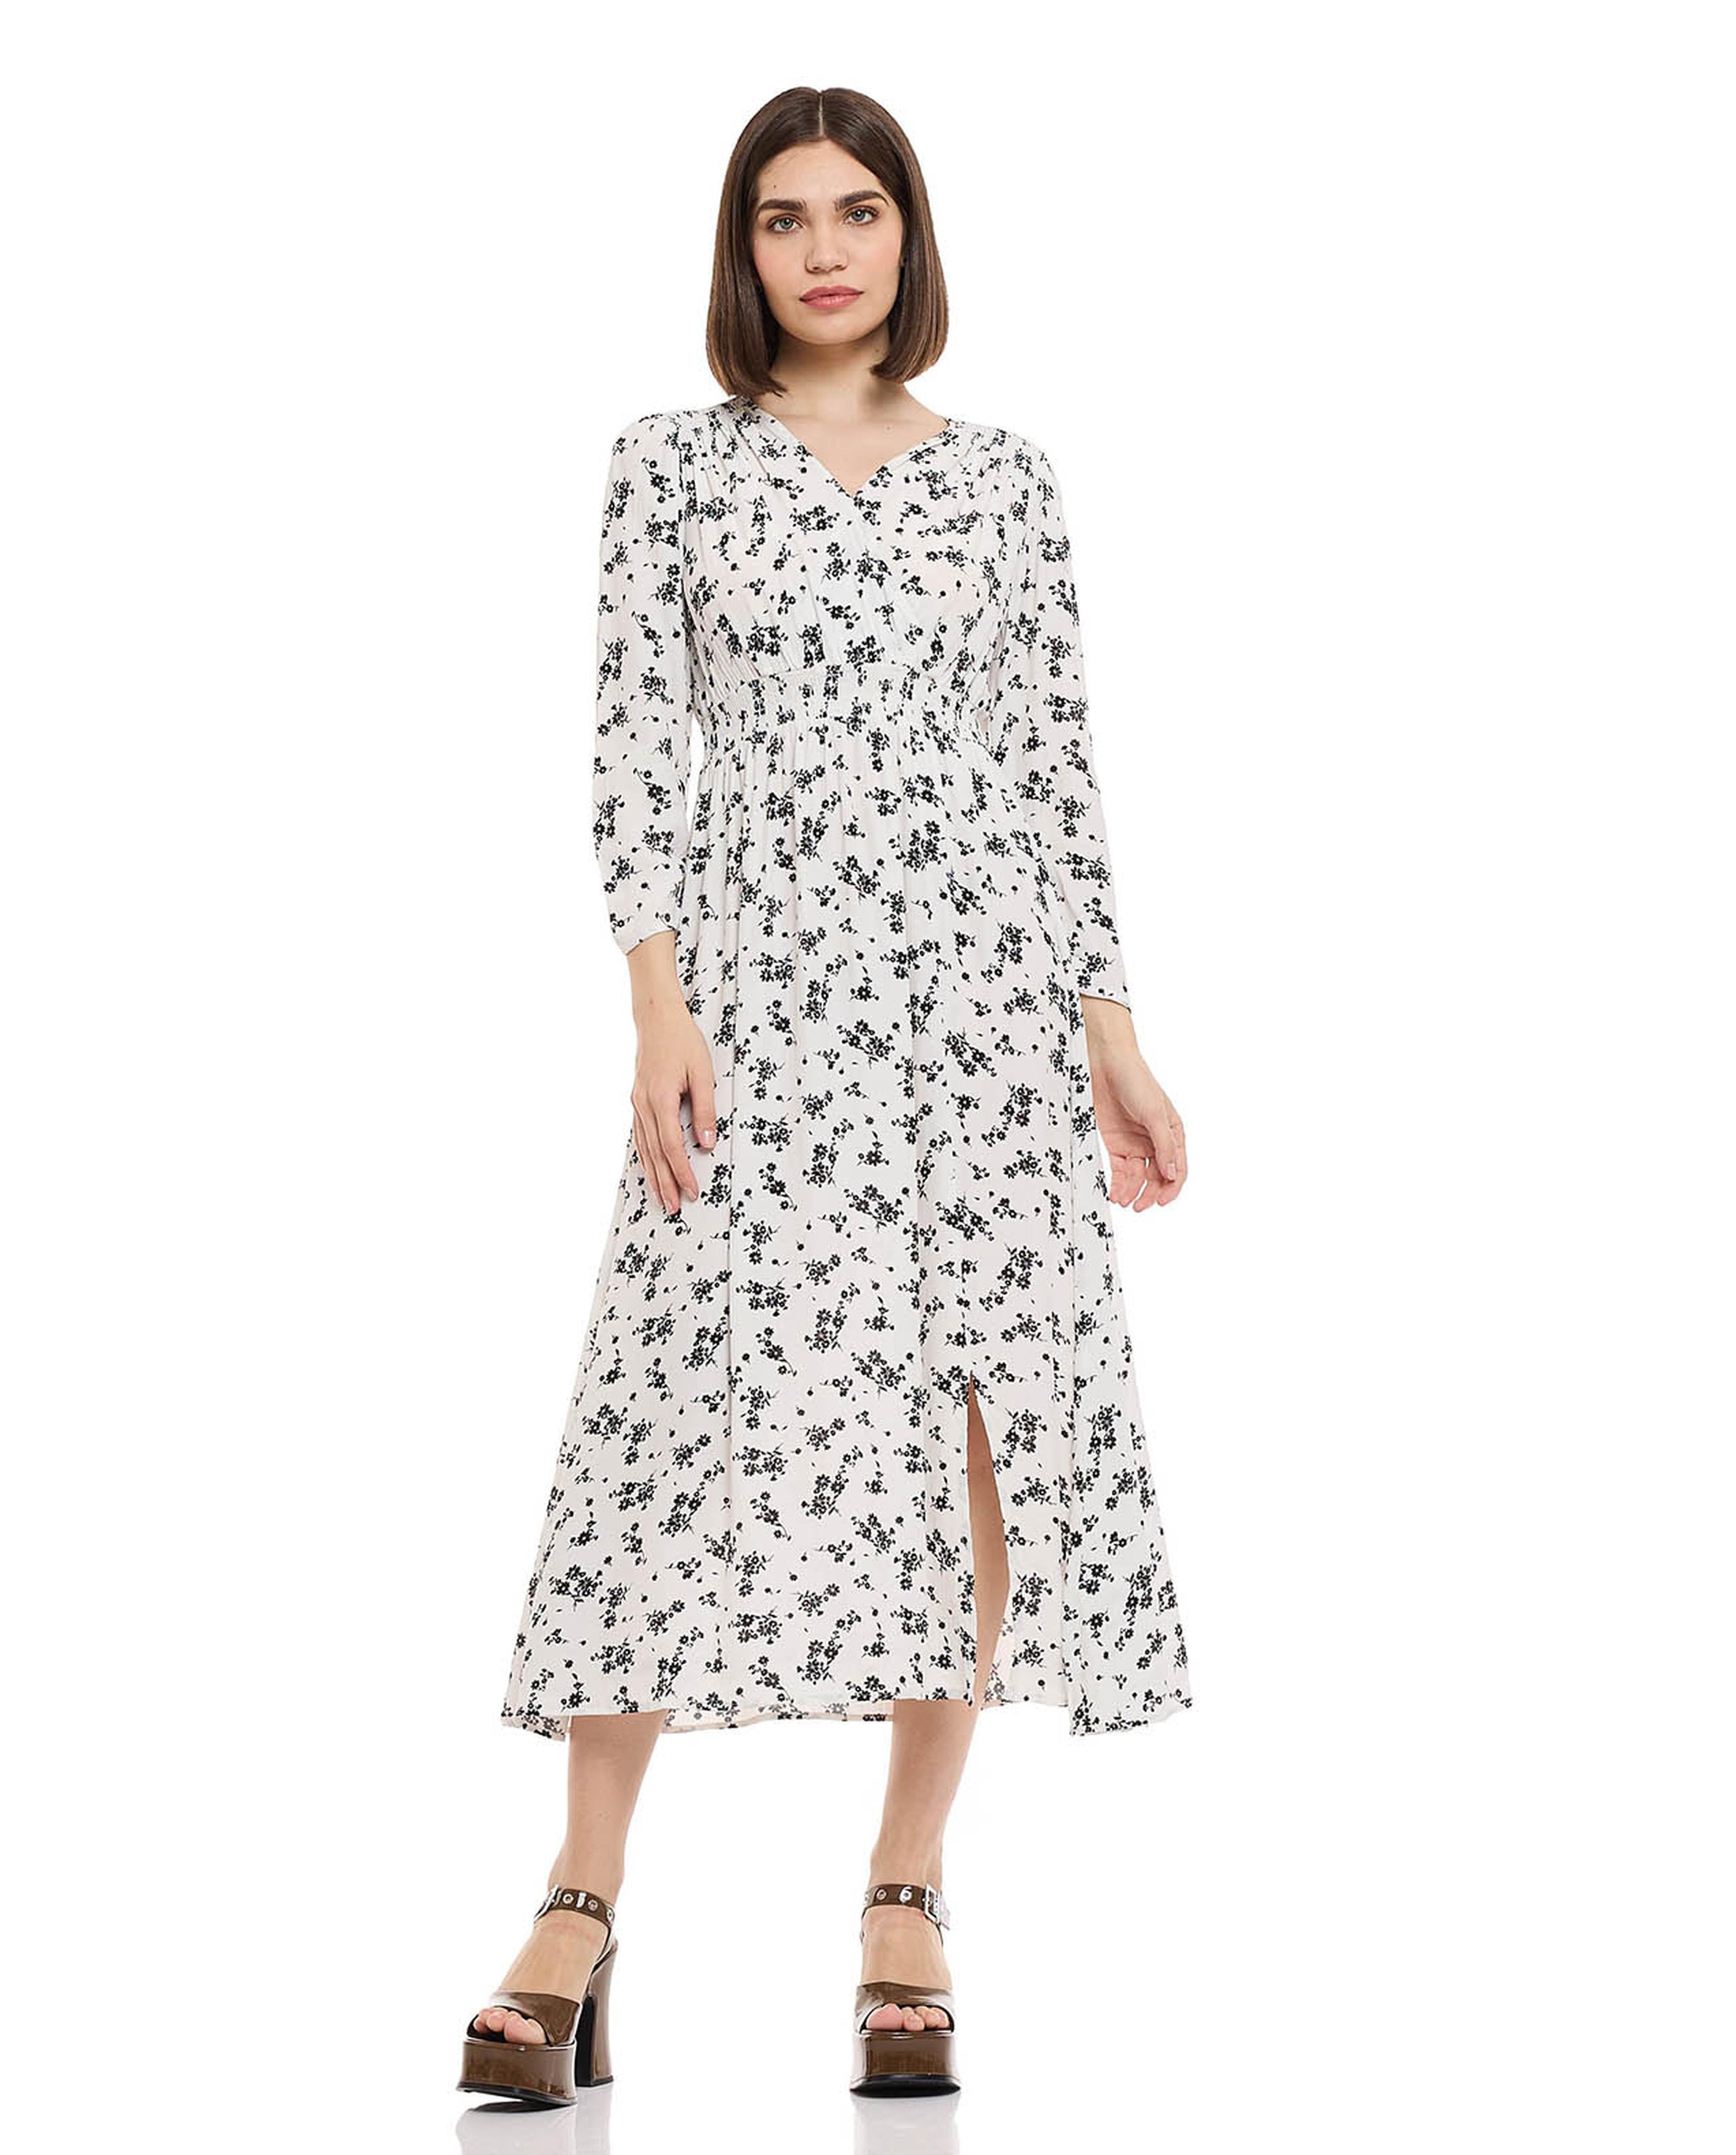 Floral Print Midi Dress with V-Neck and 3/4 Sleeves